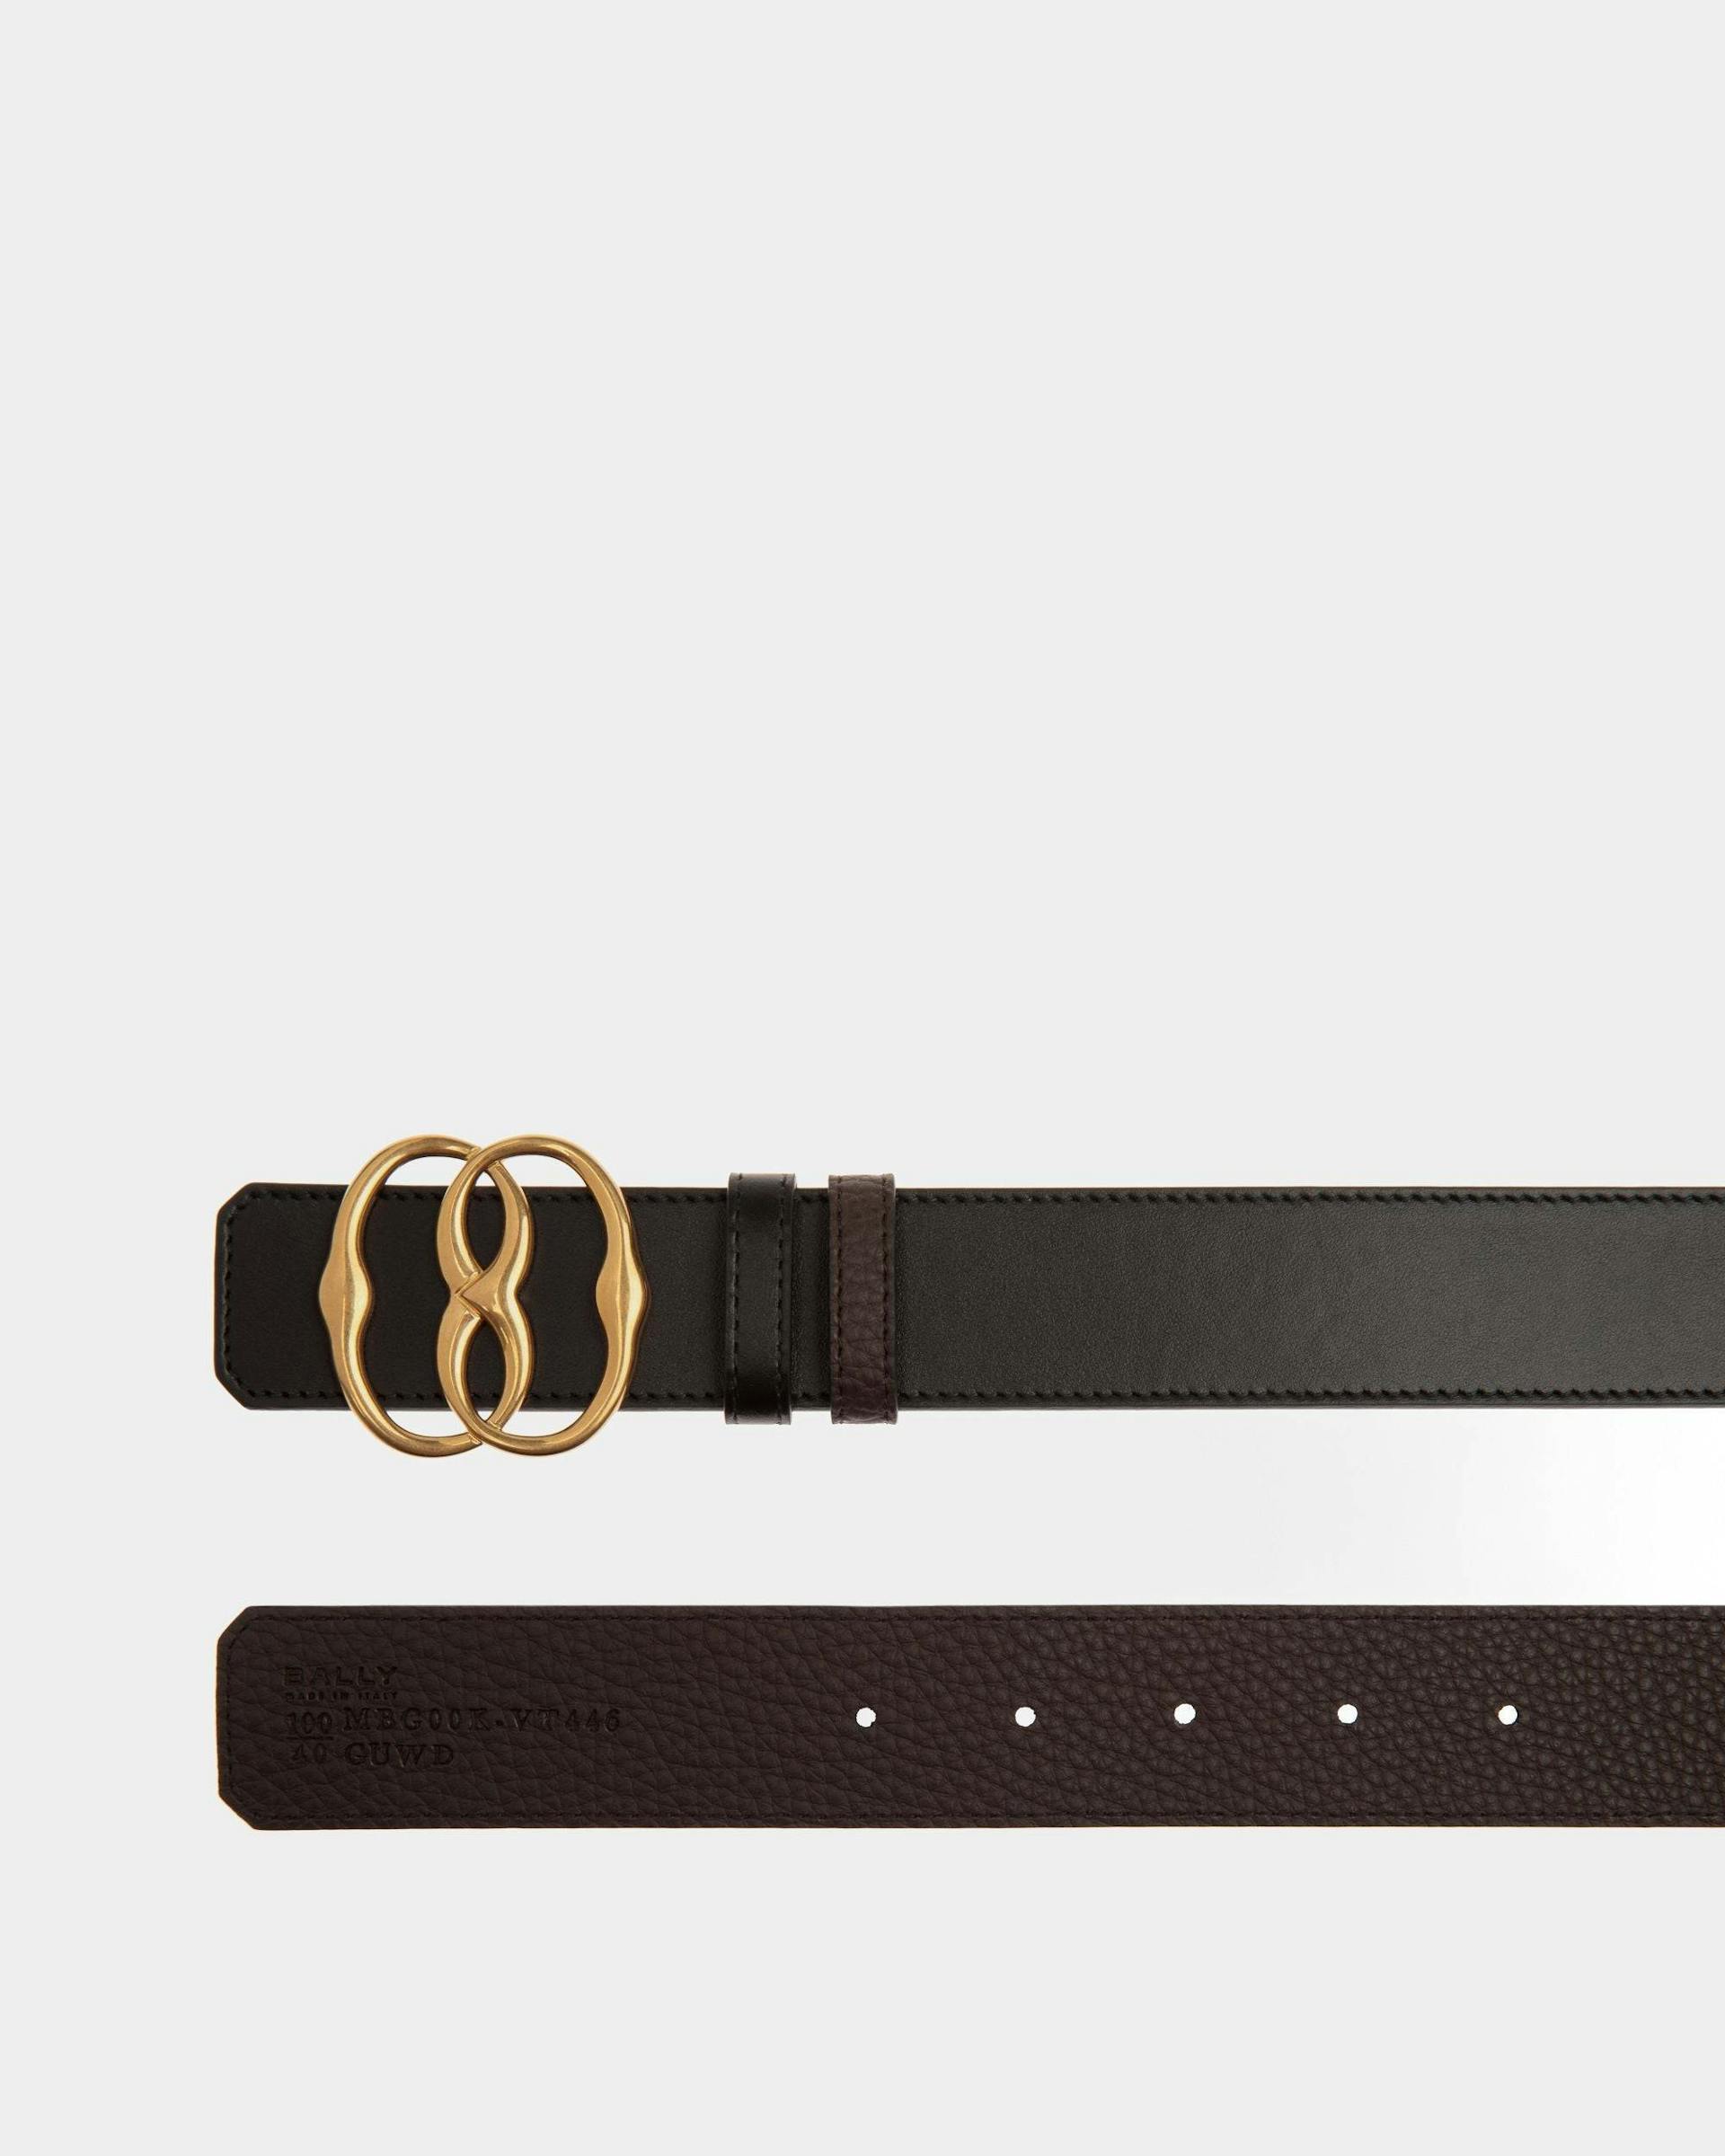 Bally Iconic 35mm Belt In Brown And Black Leather - Men's - Bally - 02